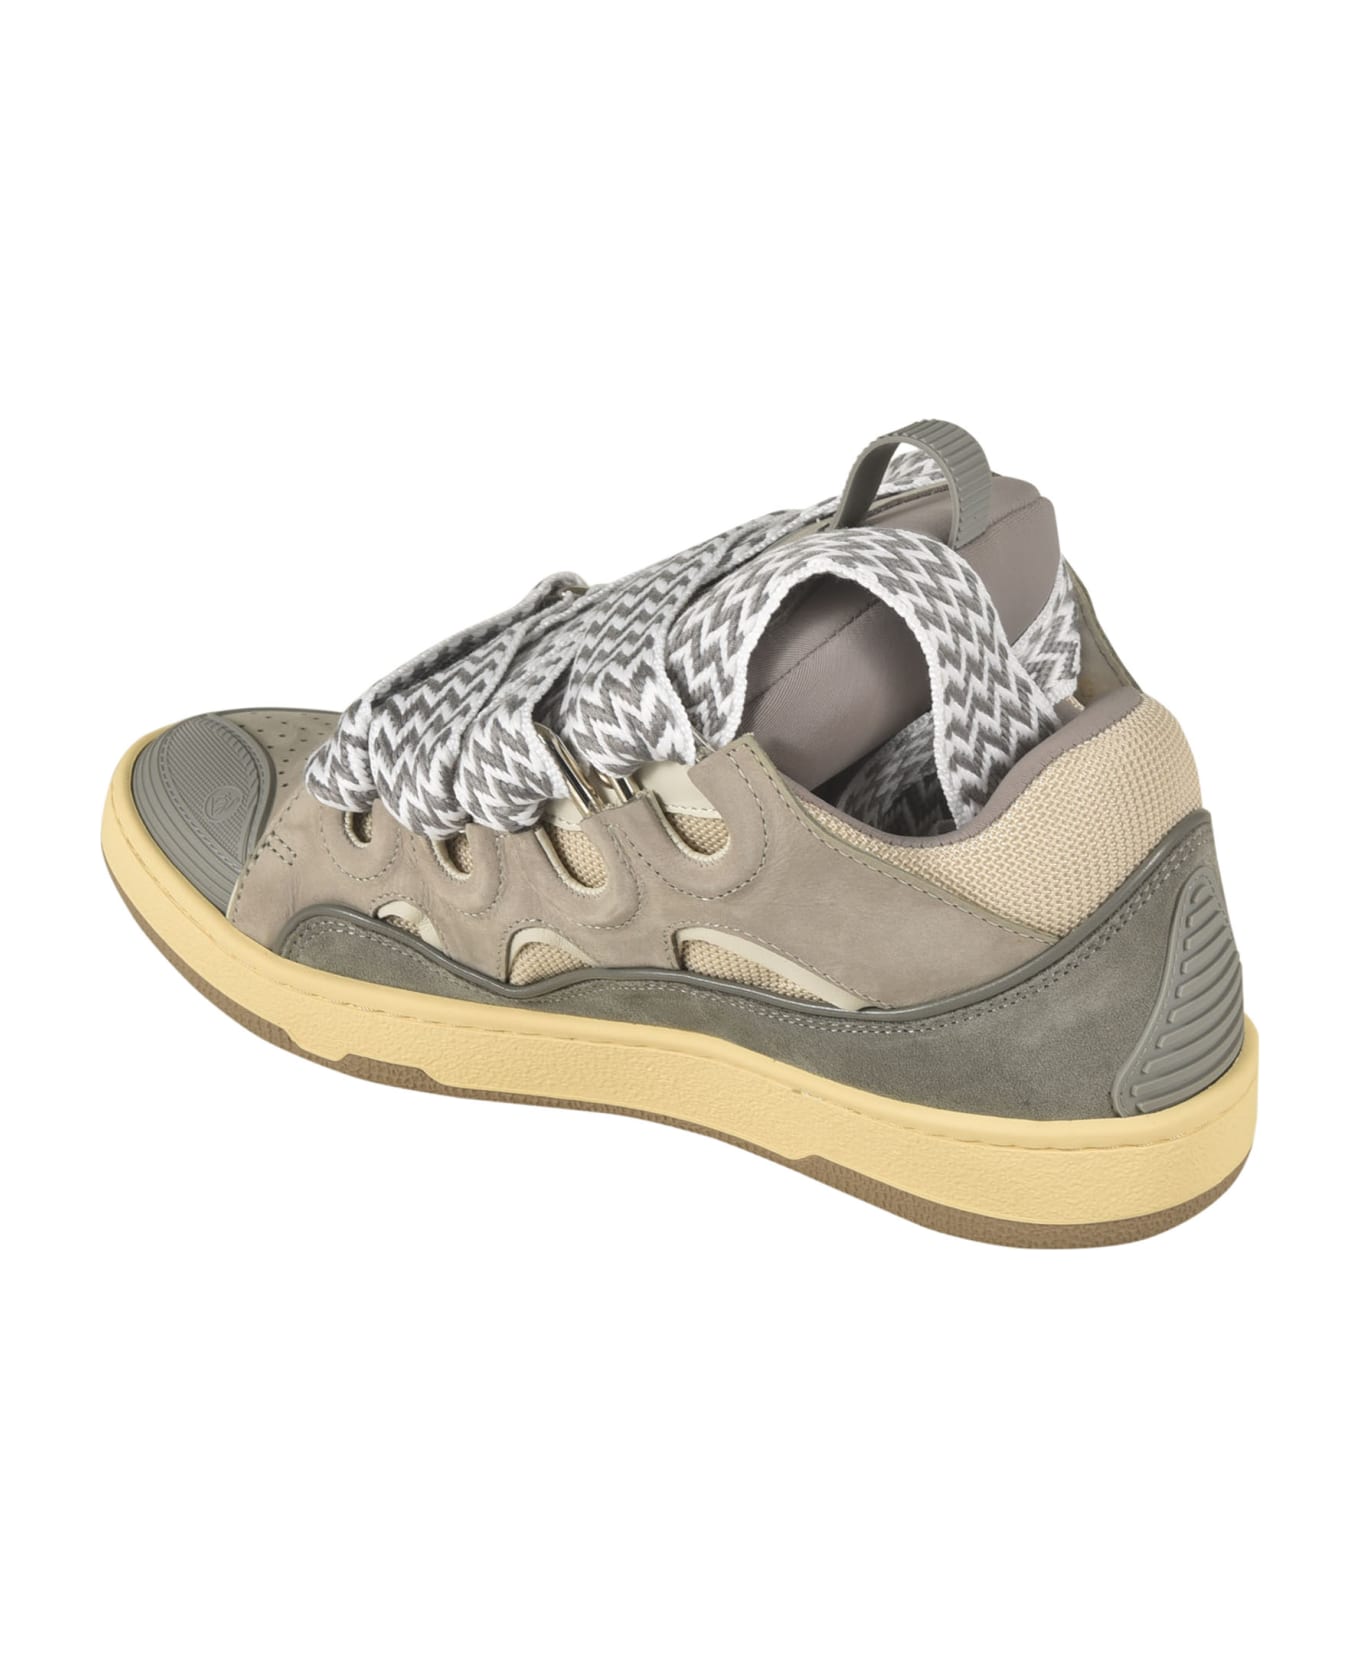 Lanvin Thick Lace Sneakers - Grey スニーカー